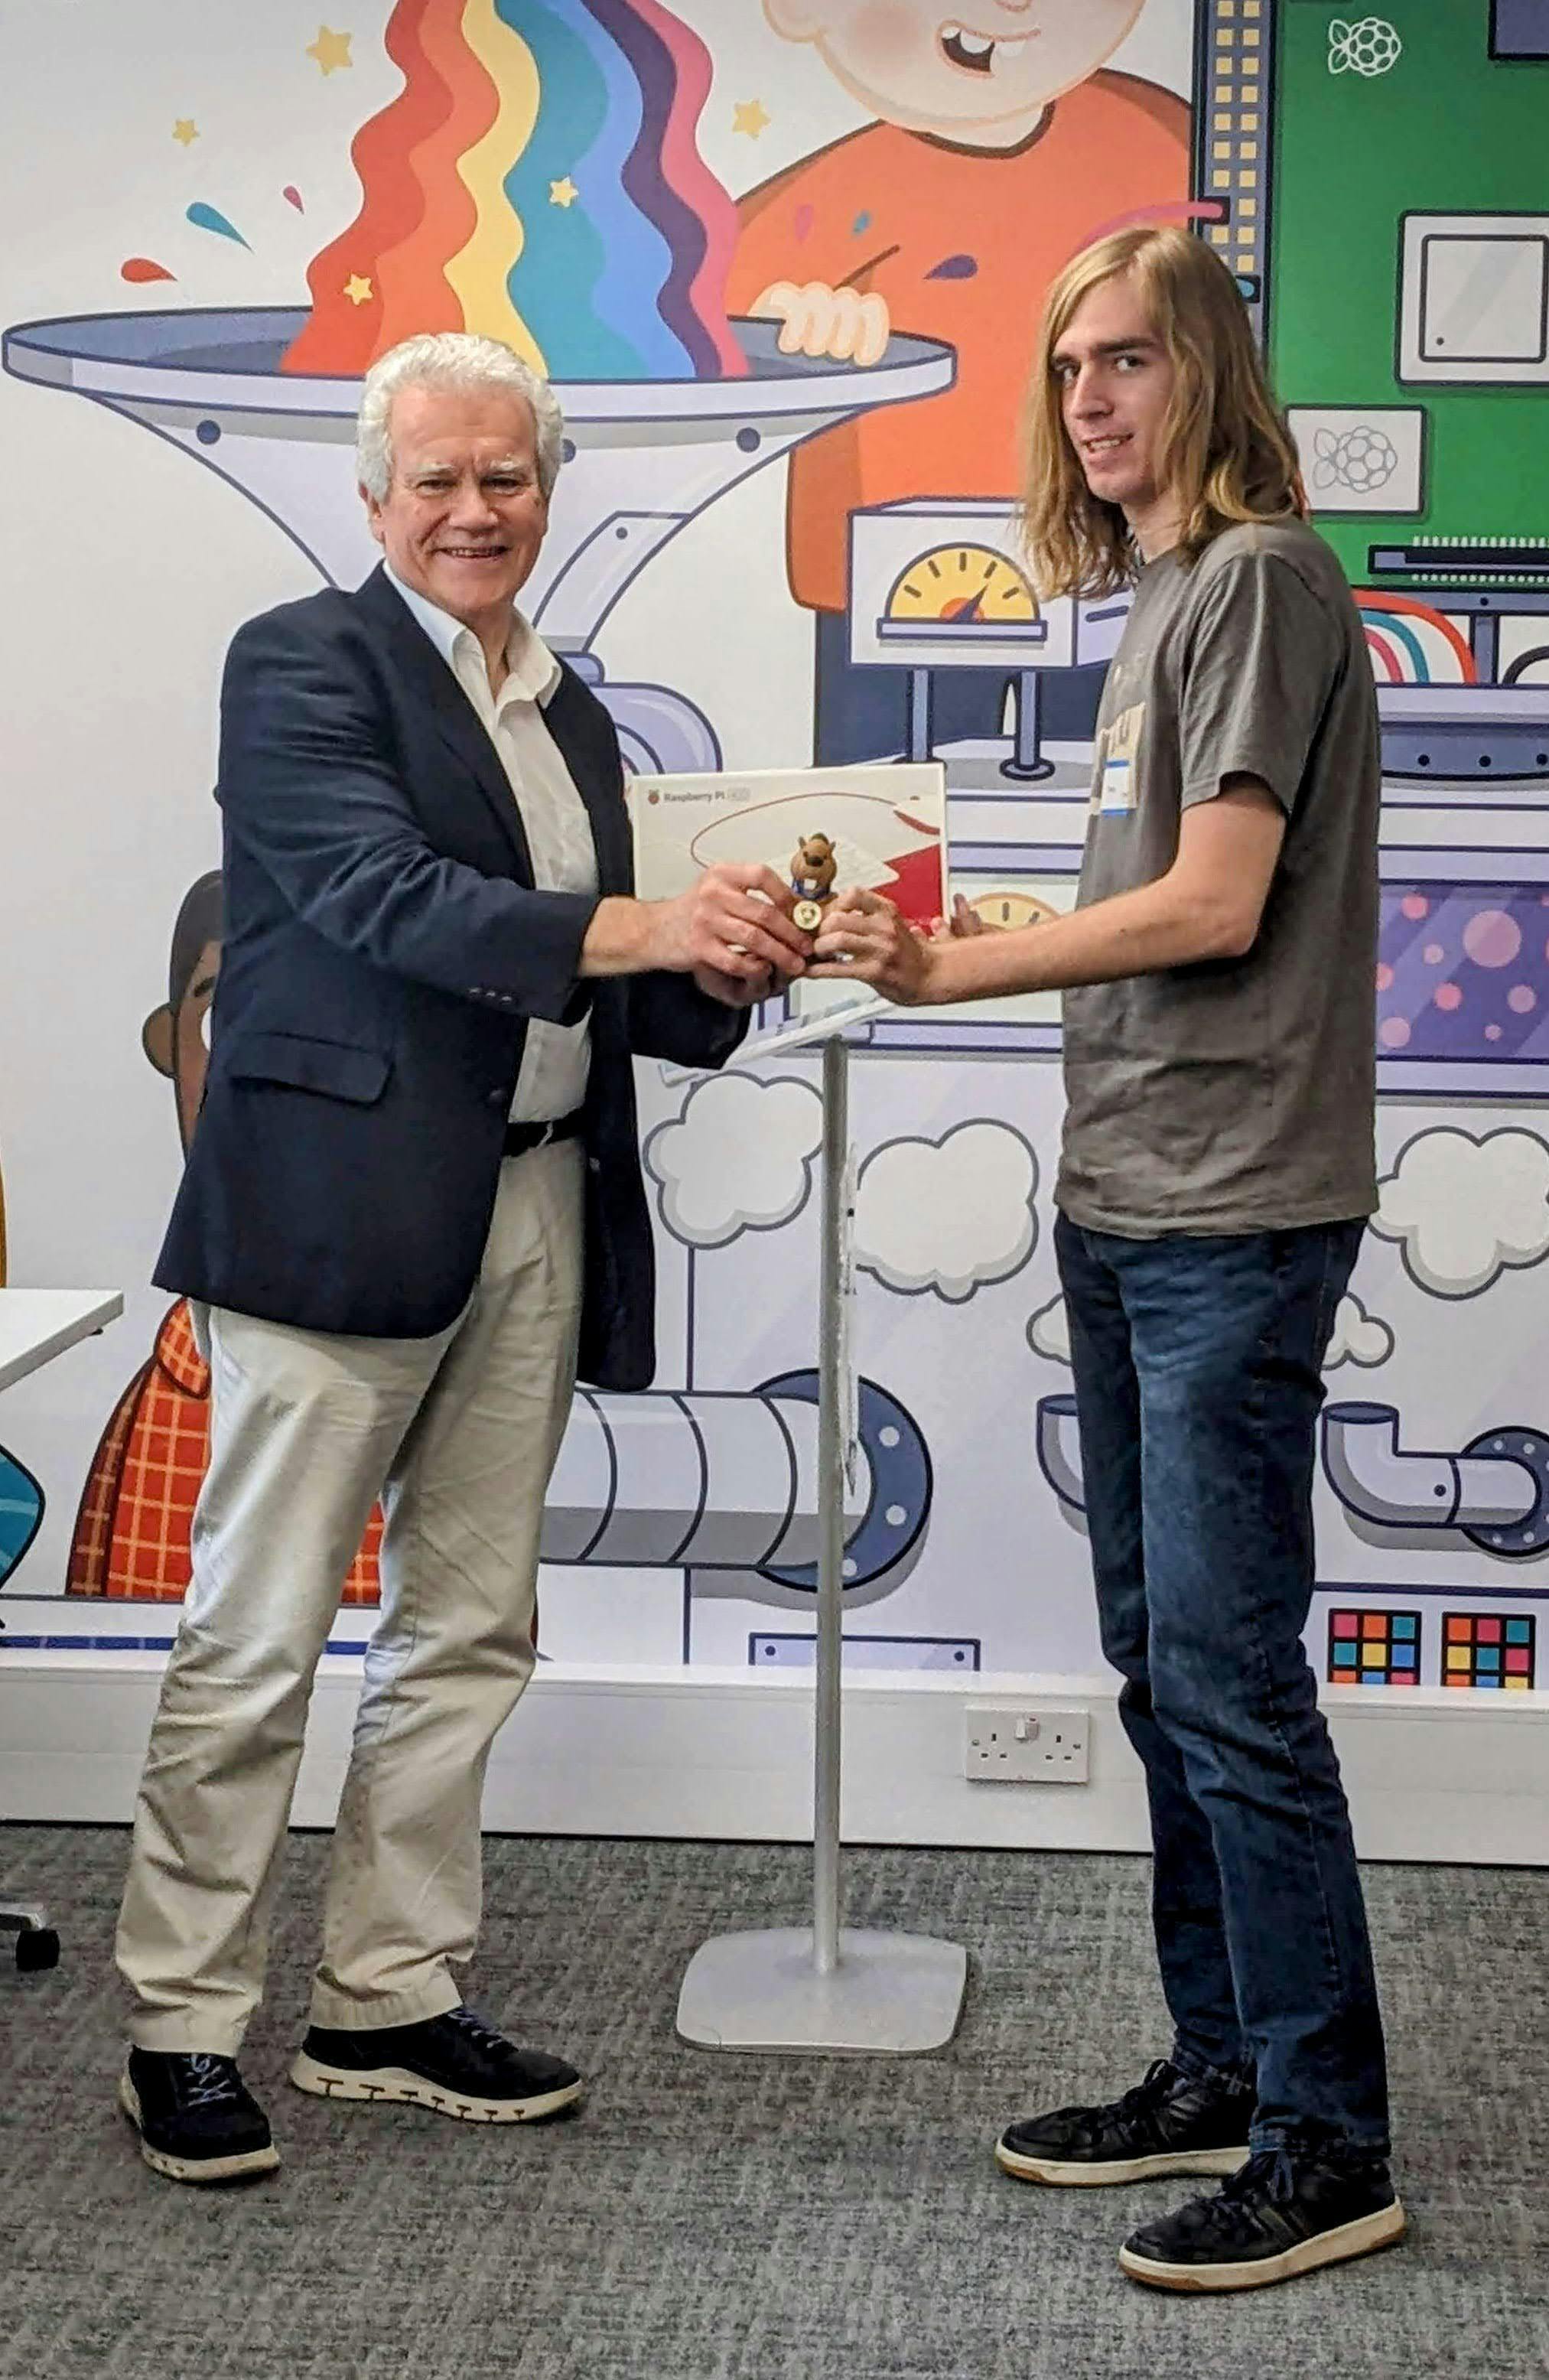 Peter Bailey comes second in Oxford University Computing Challenge